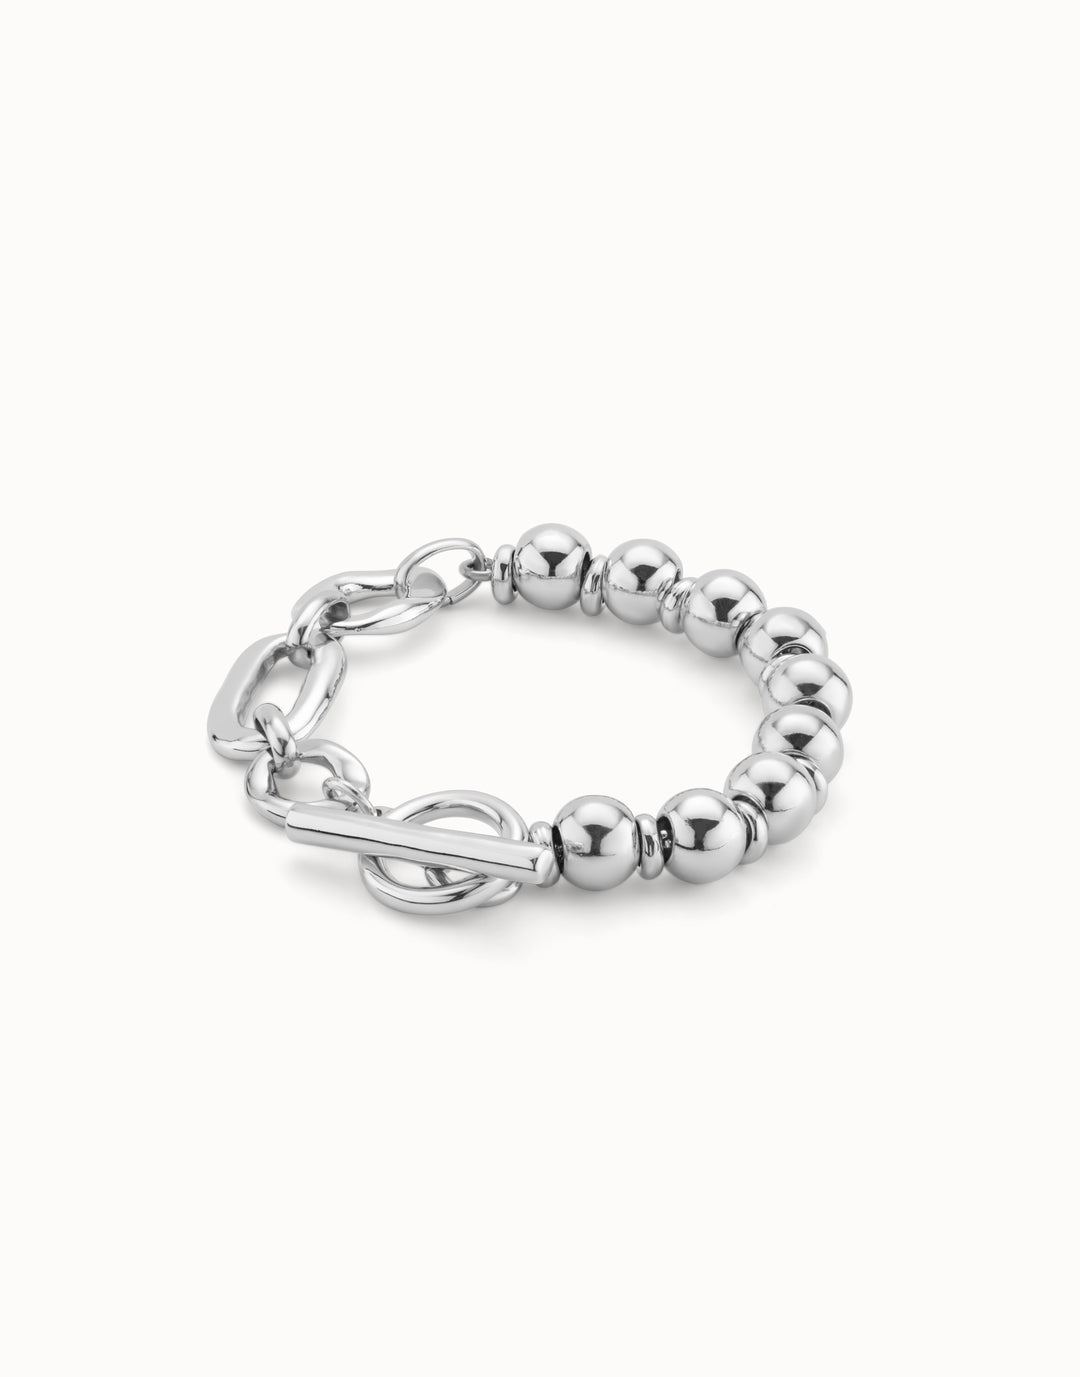 CHEERFUL BRACELETS-SILVER - Kingfisher Road - Online Boutique